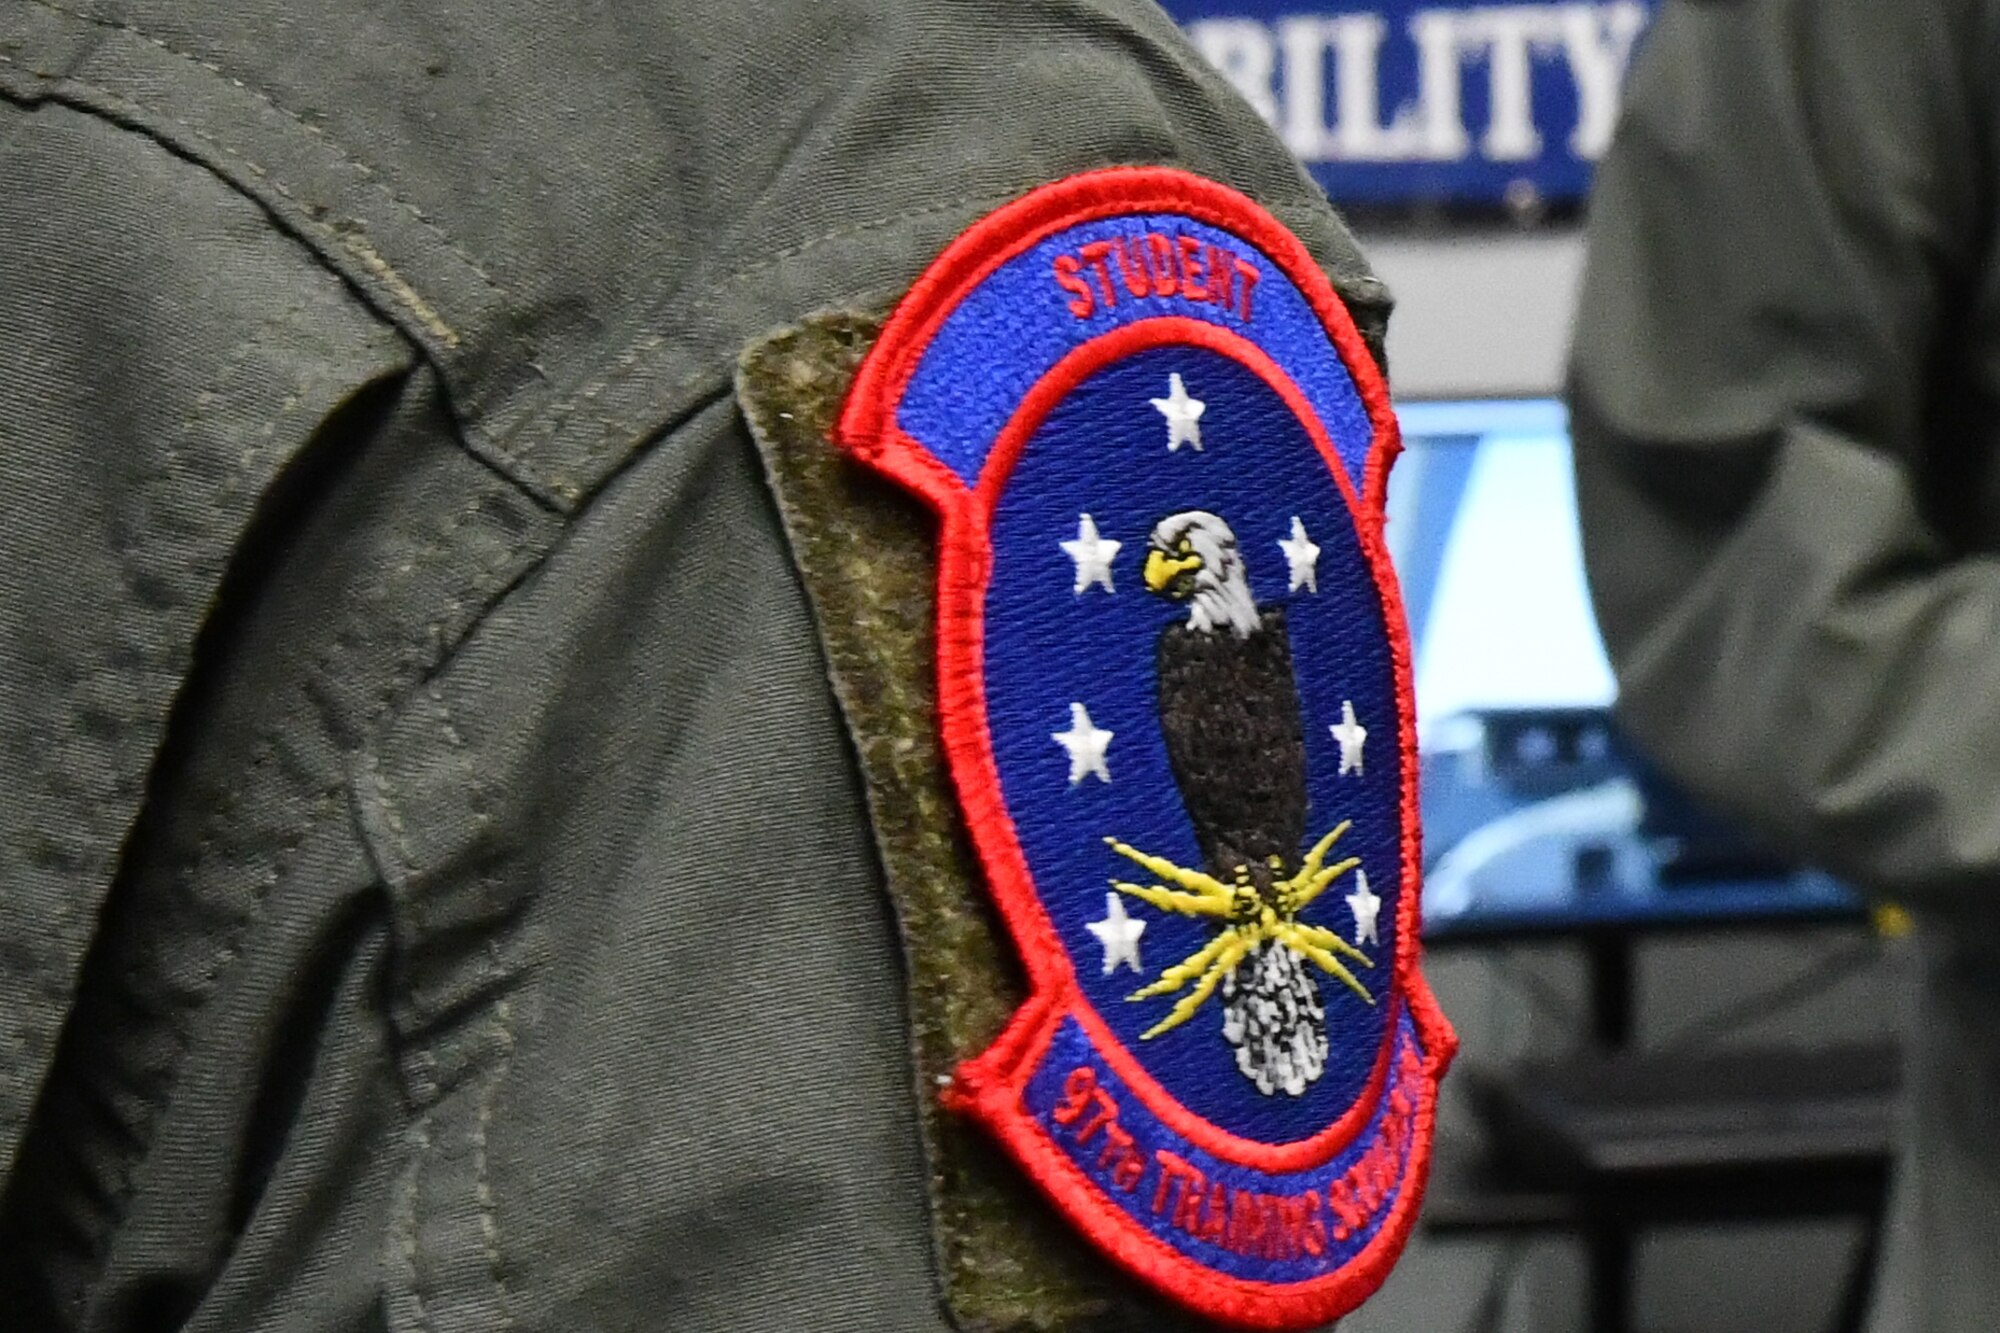 A 97th Training Squadron (TRS) patch is shown at Altus Air Force Base, Oklahoma, Jan. 26, 2023. The 97th TRS graduated 2,031 students in fiscal year 2022, the highest number in 15 years. (U.S. Air Force photo by Airman 1st Class Miyah Gray)